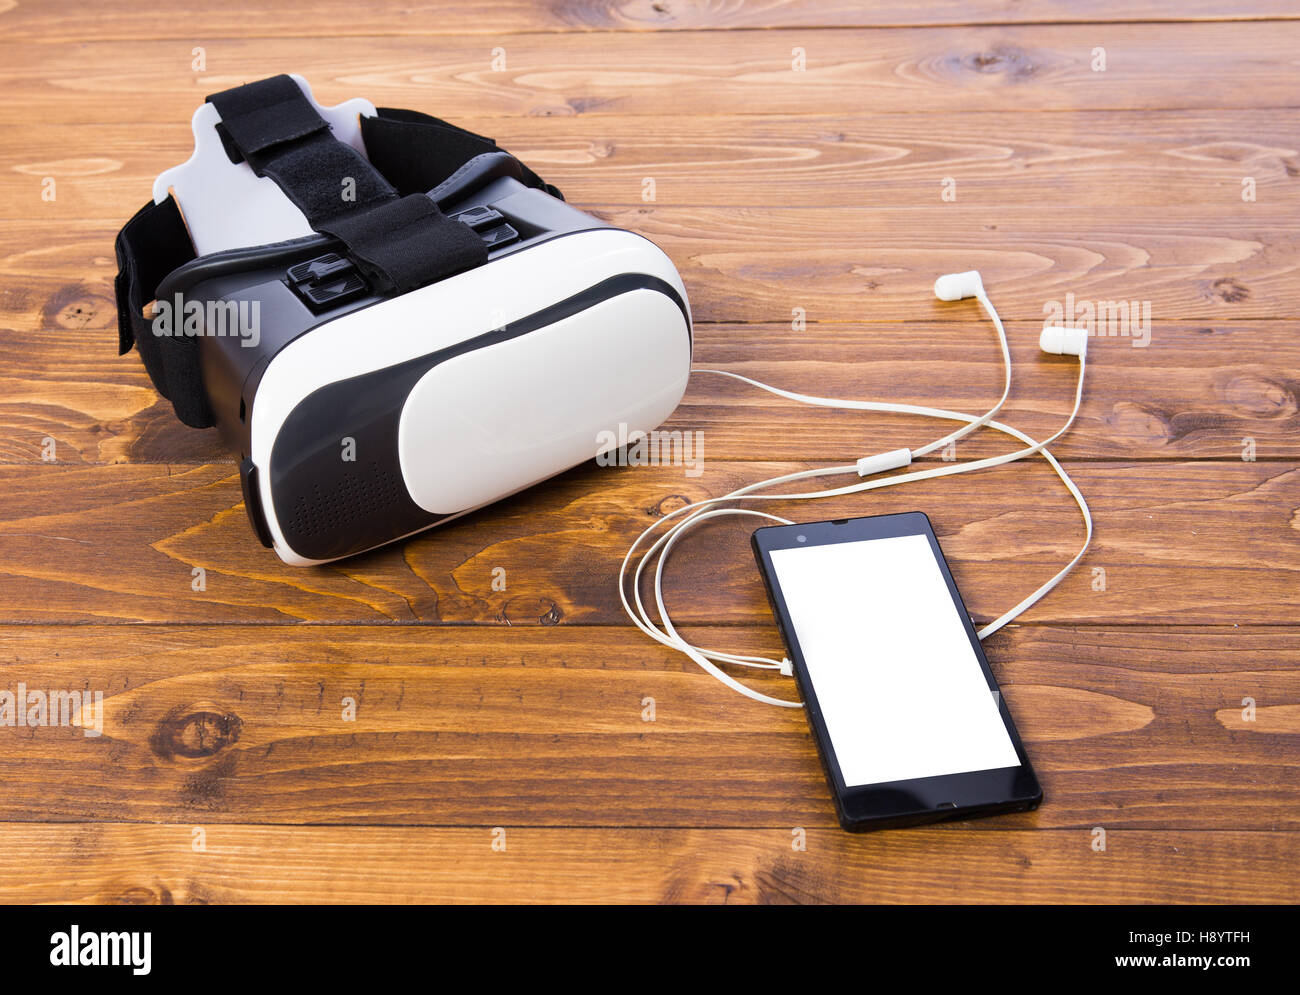 front side of a vr headset with earbuds and a smart phone, isolated on wooden floor background, close up Stock Photo